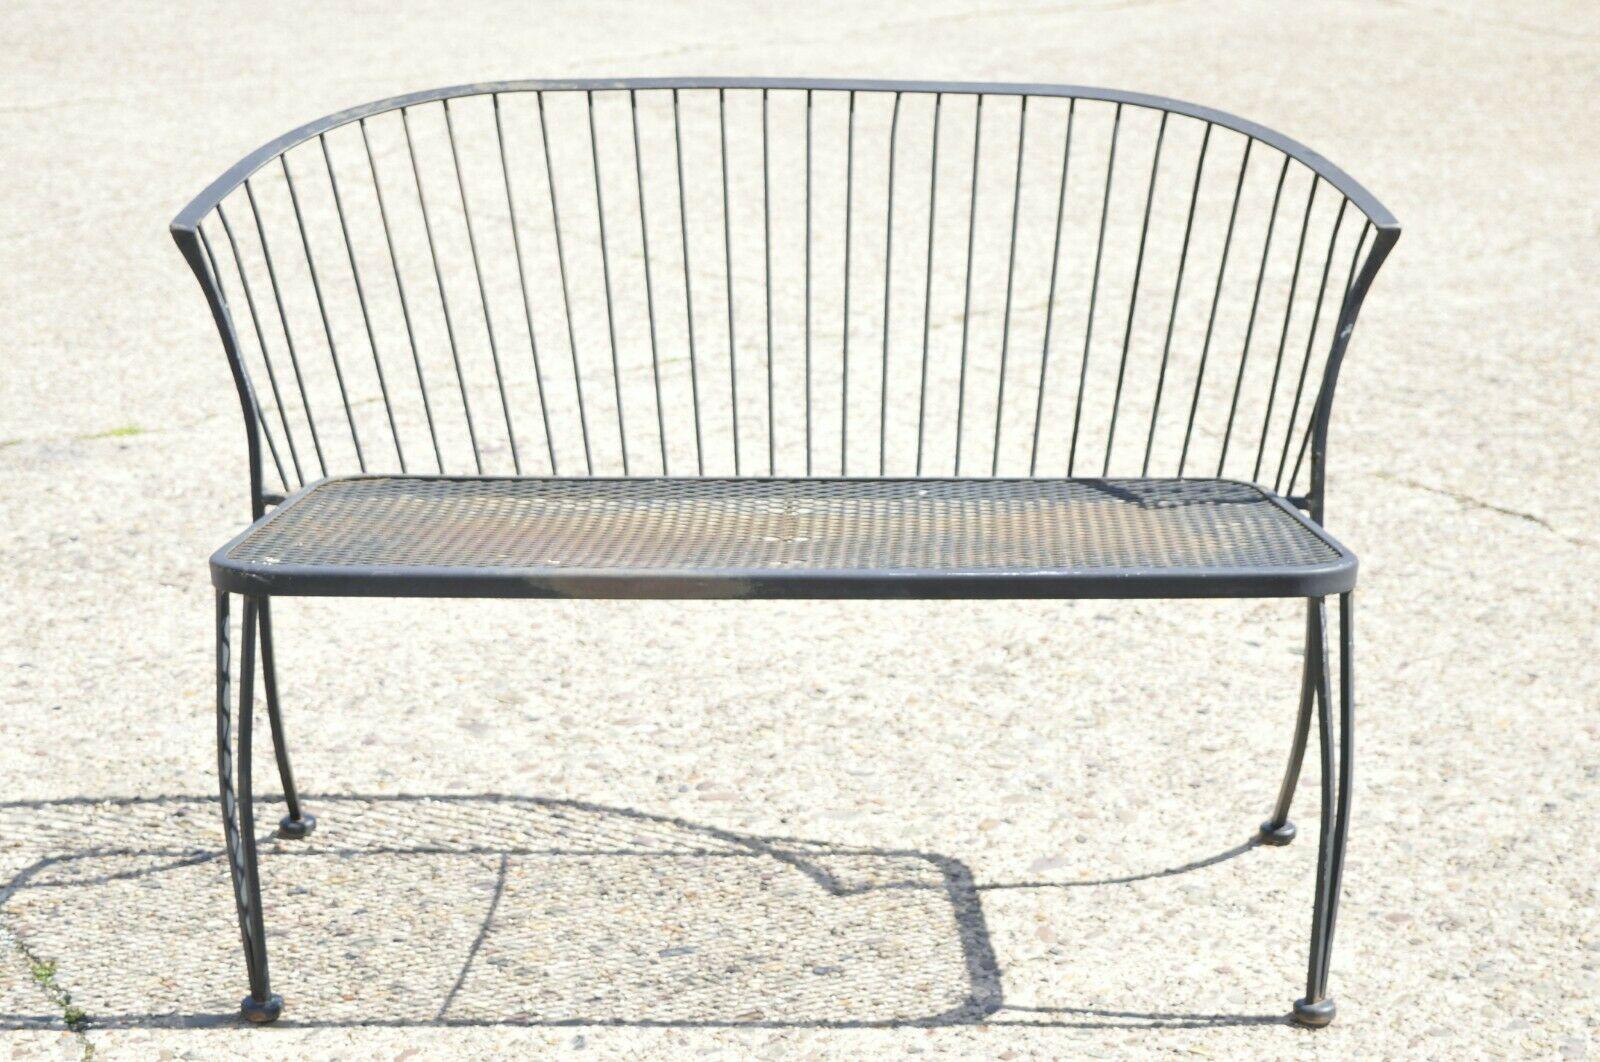 Russell woodard pinecrest style black wrought iron garden patio loveseat settee. Item features curved barrel back, mesh seat and back, wrought iron construction, clean modernist lines, sleek sculptural form, unmarked, possibly by Russell Woodard.